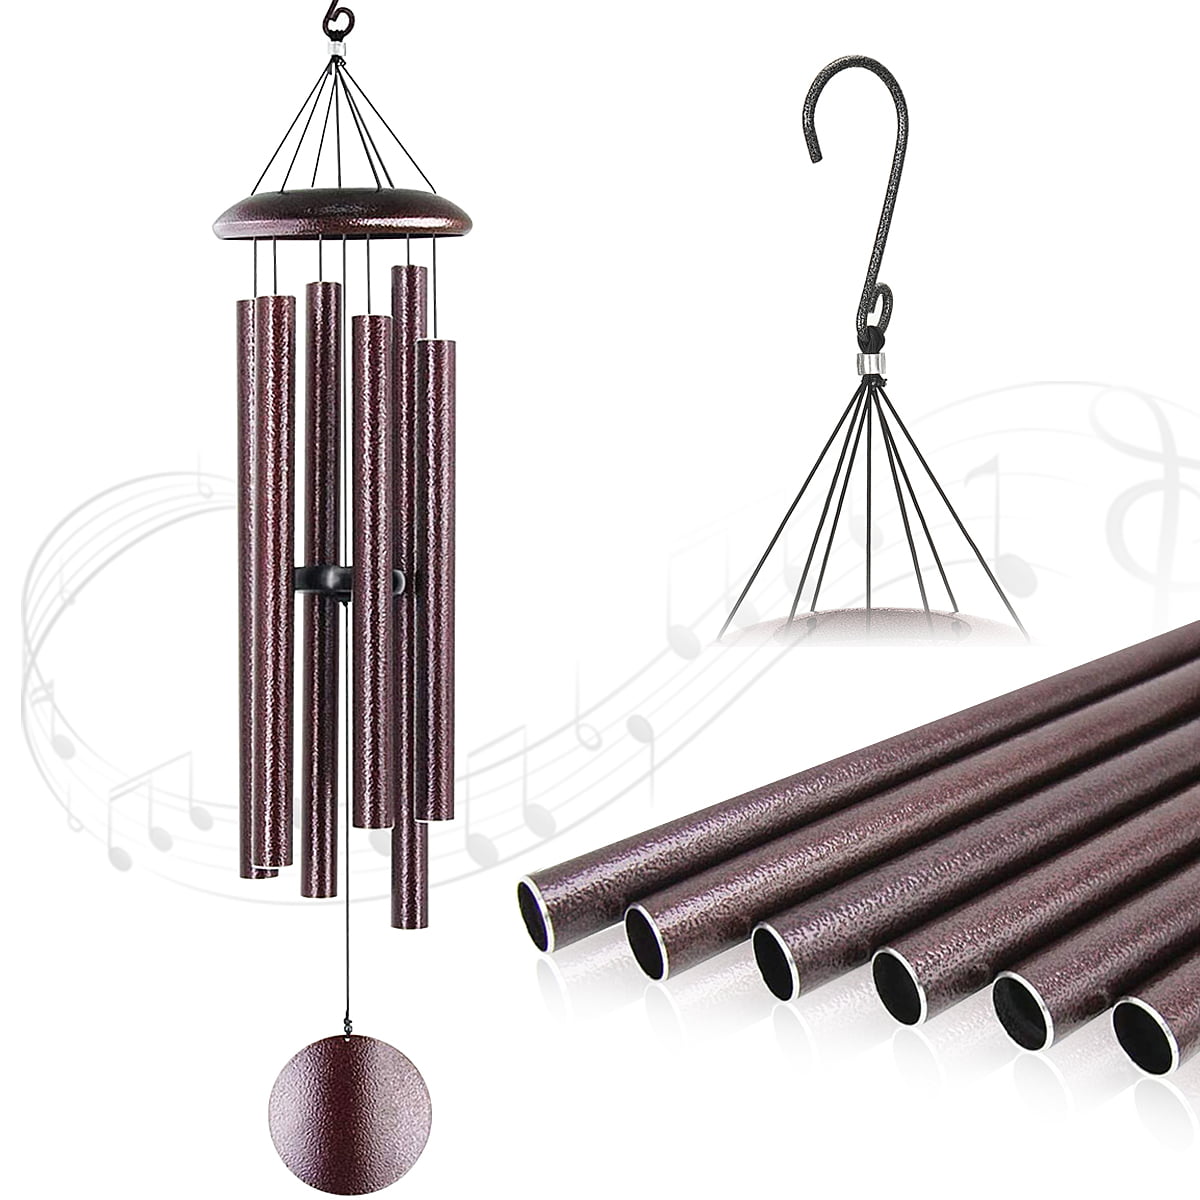 Creative Window Garden Yard Wind Chime Copper Wind Bells Tubes Home Decor Gifts 